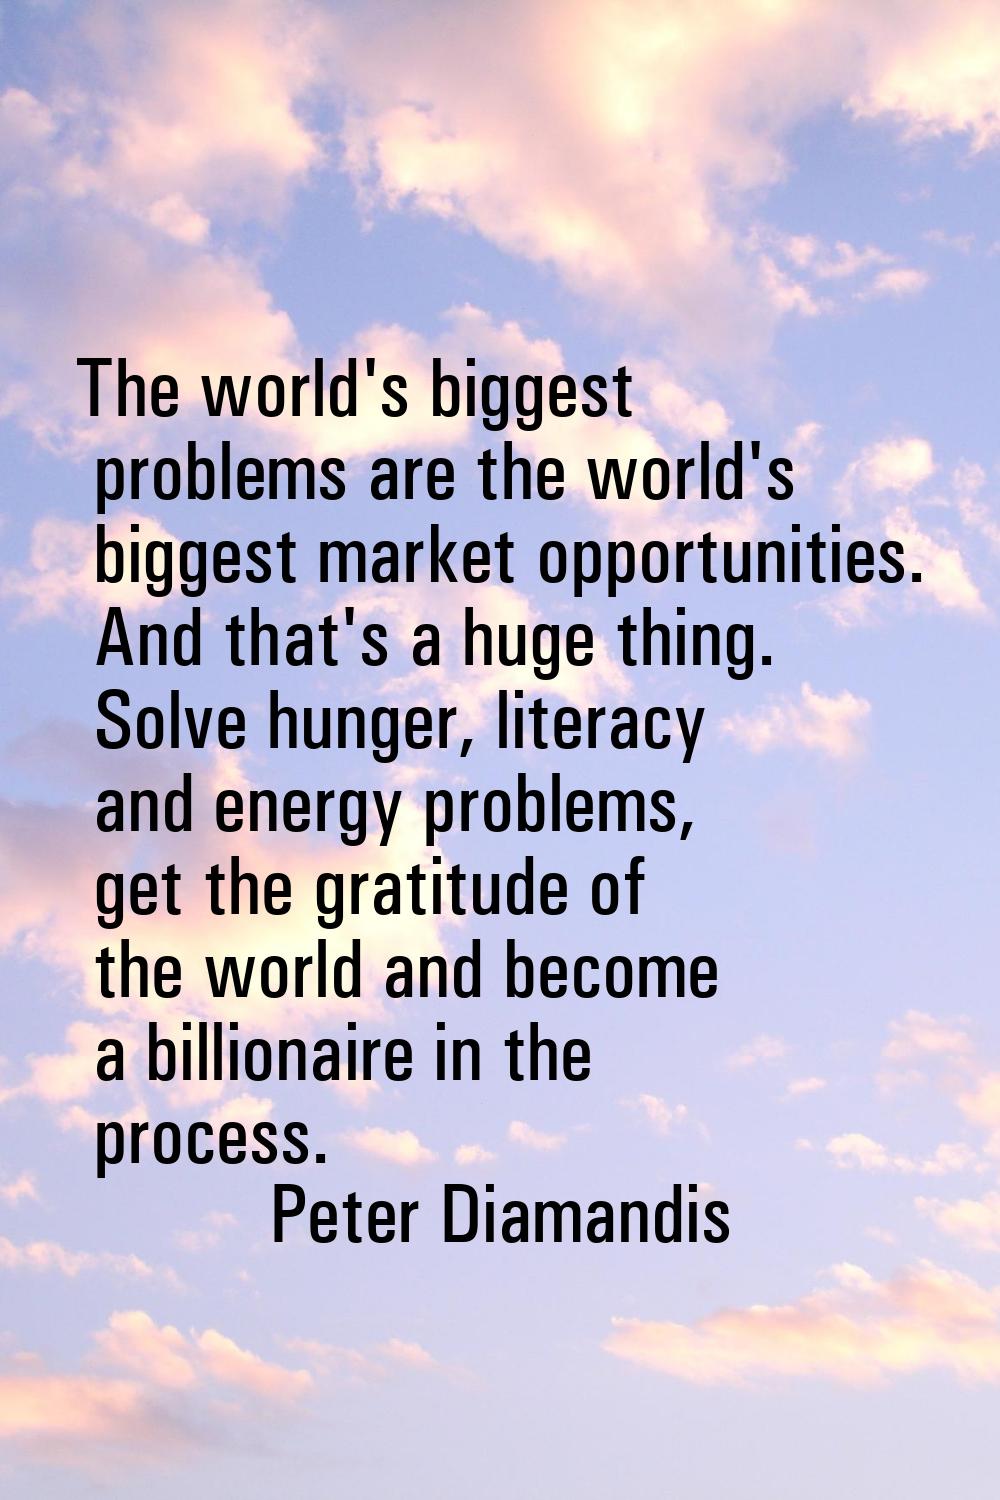 The world's biggest problems are the world's biggest market opportunities. And that's a huge thing.